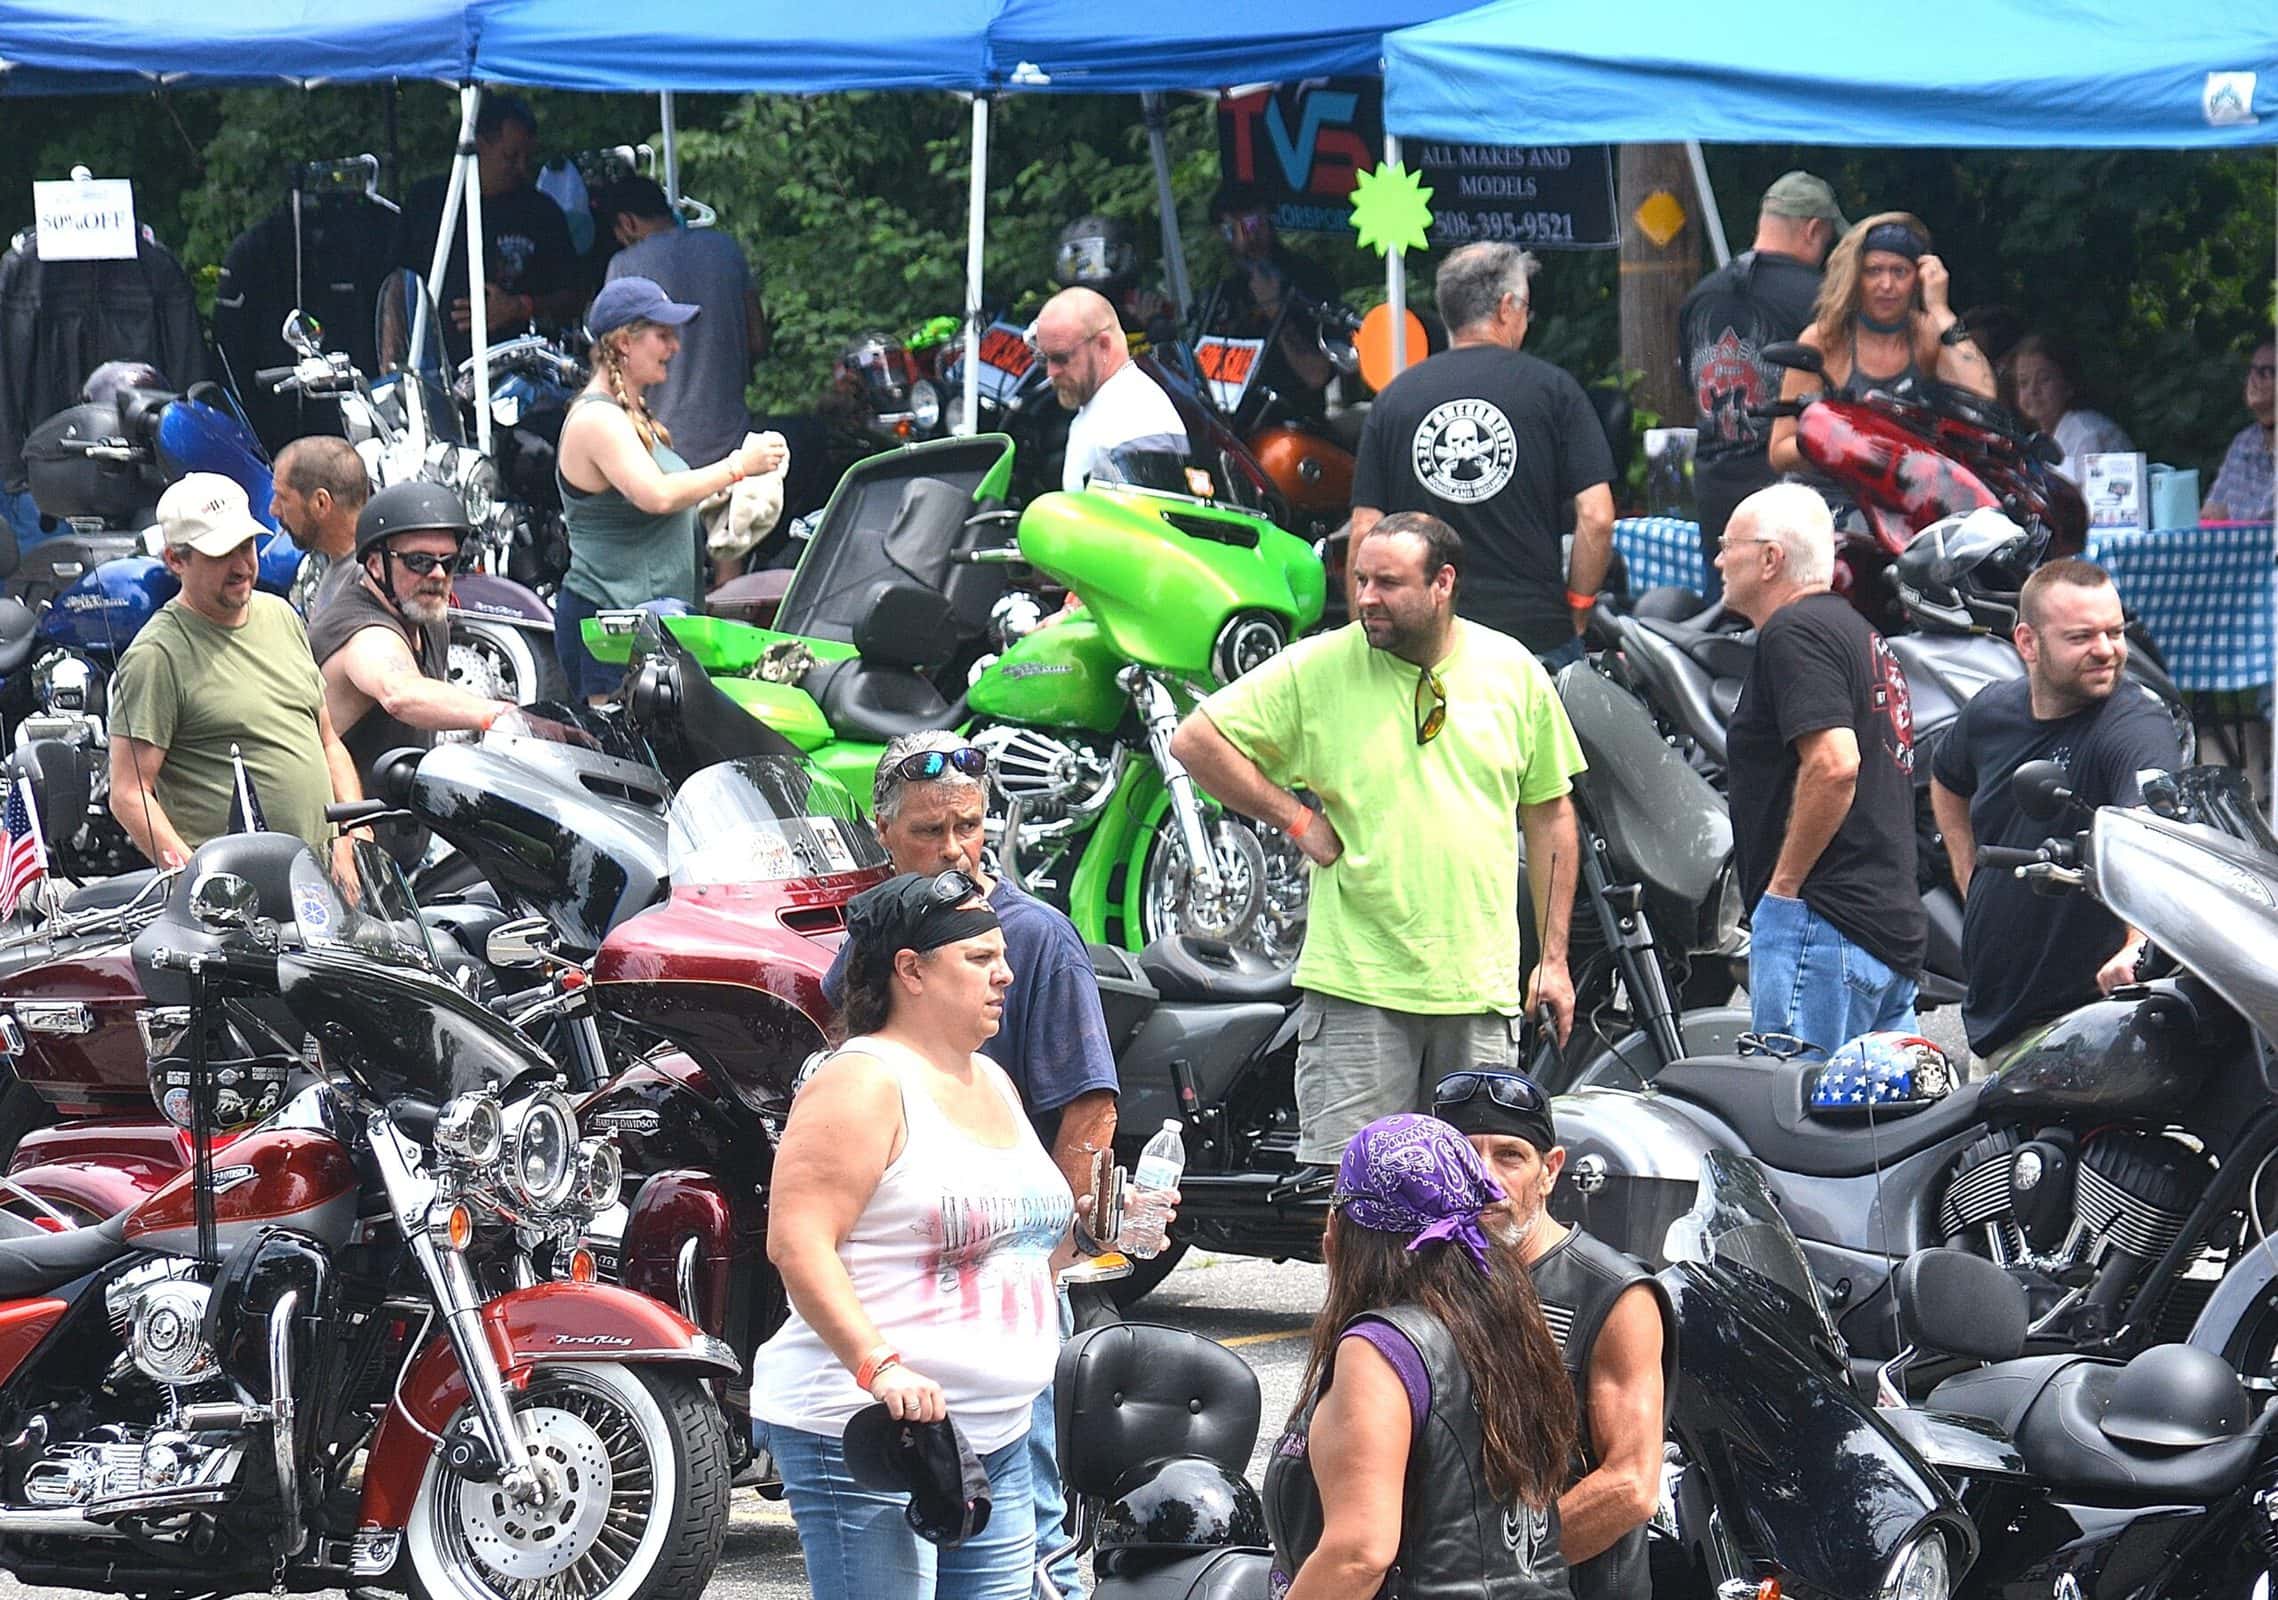 Ride participants mingle among their motorcycles parked outside the Marlborough Moose.